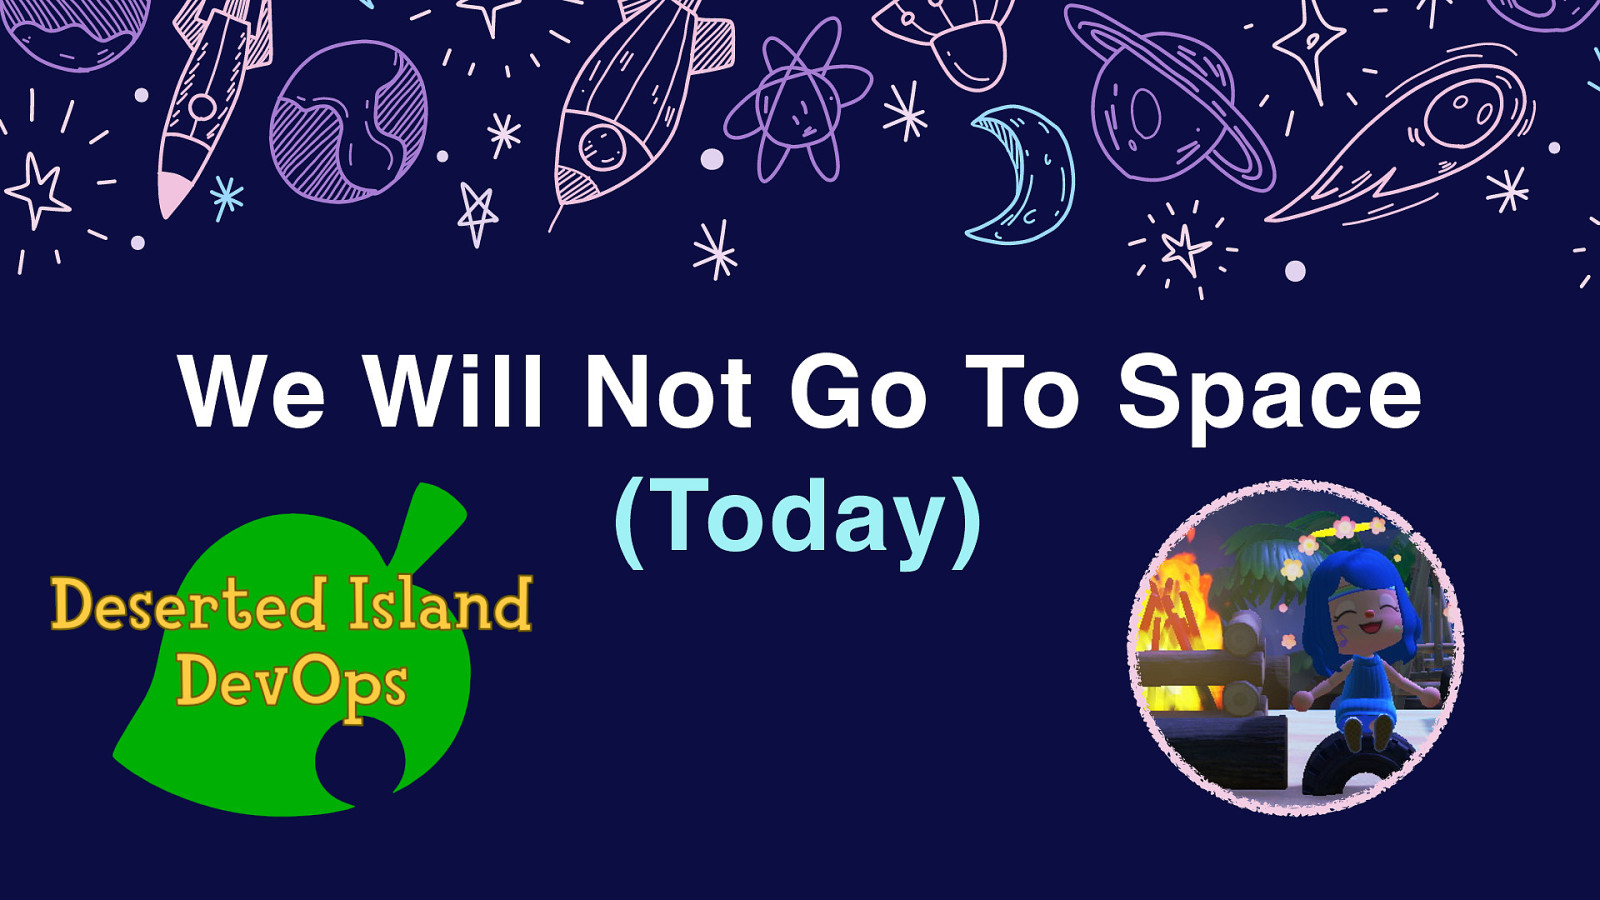 We Will Not Go To Space (Today)